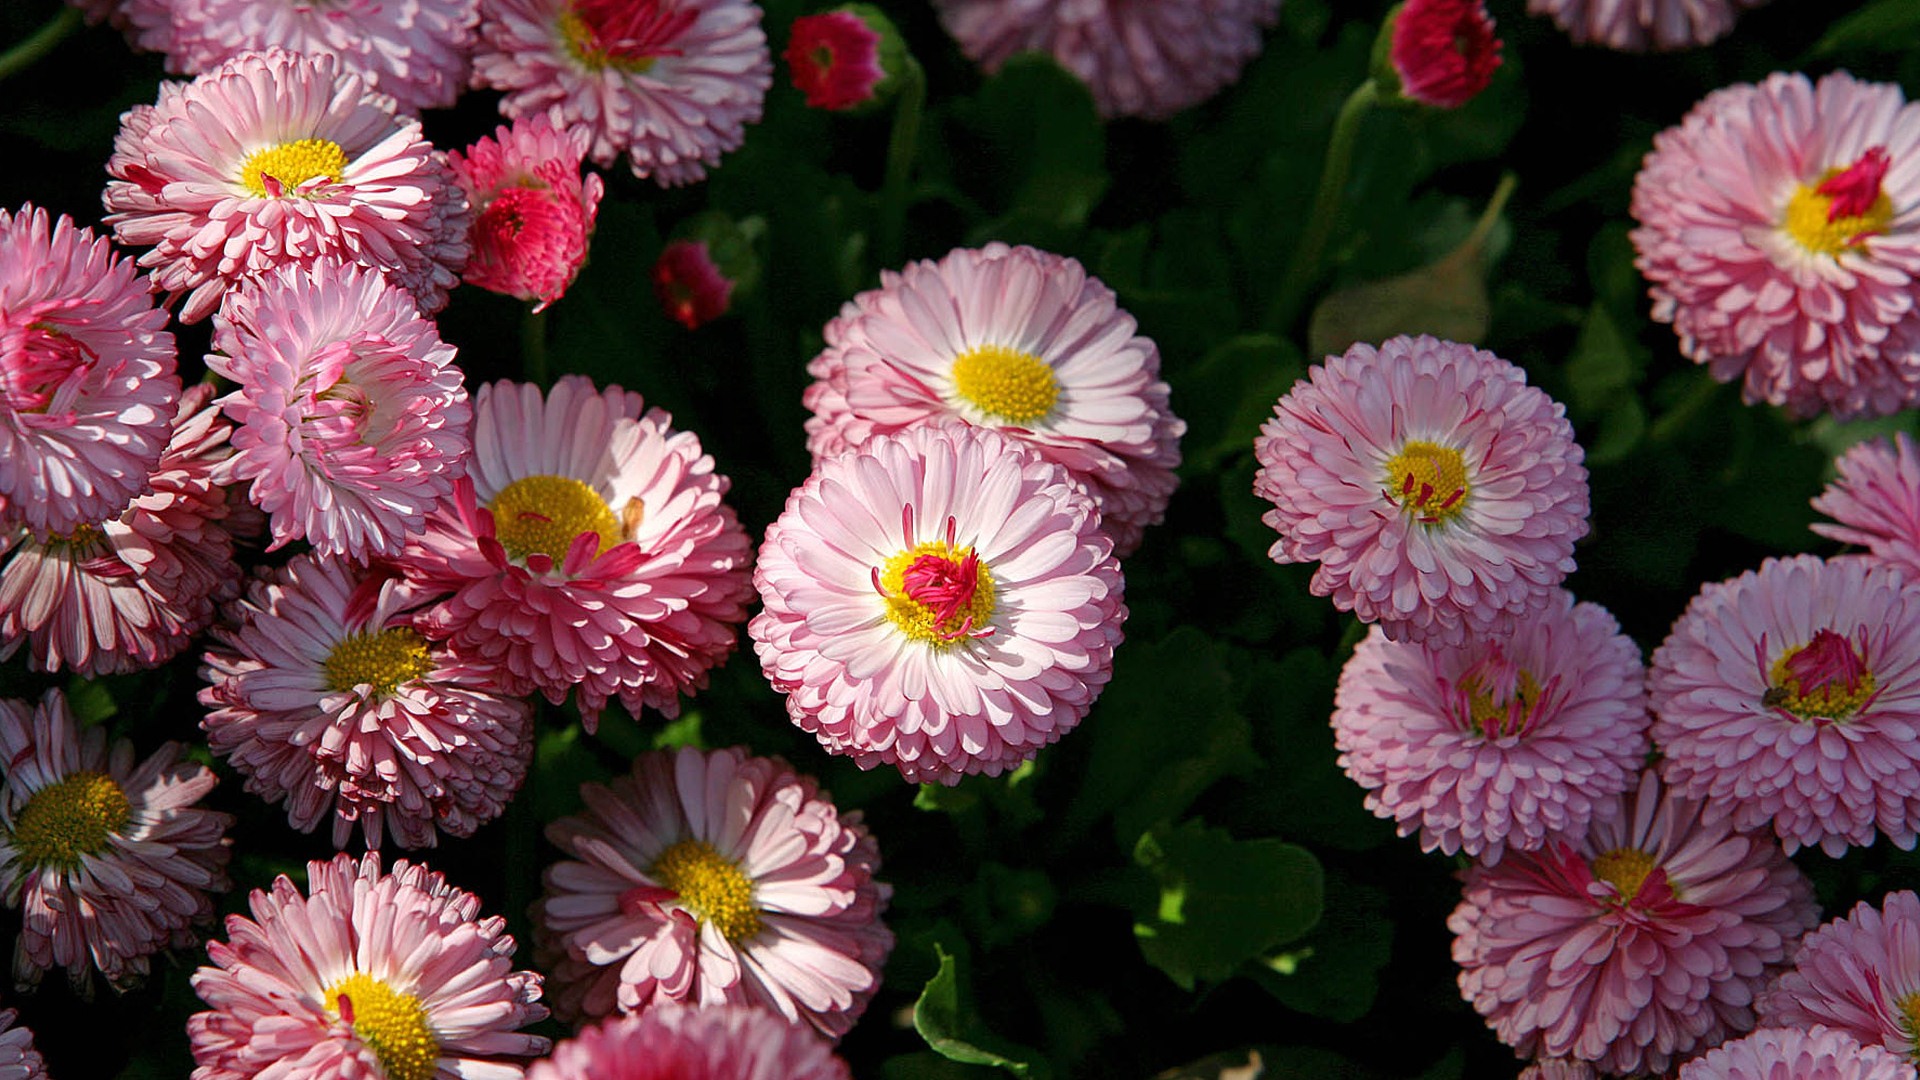 Daisies flowers close-up HD wallpapers #16 - 1920x1080